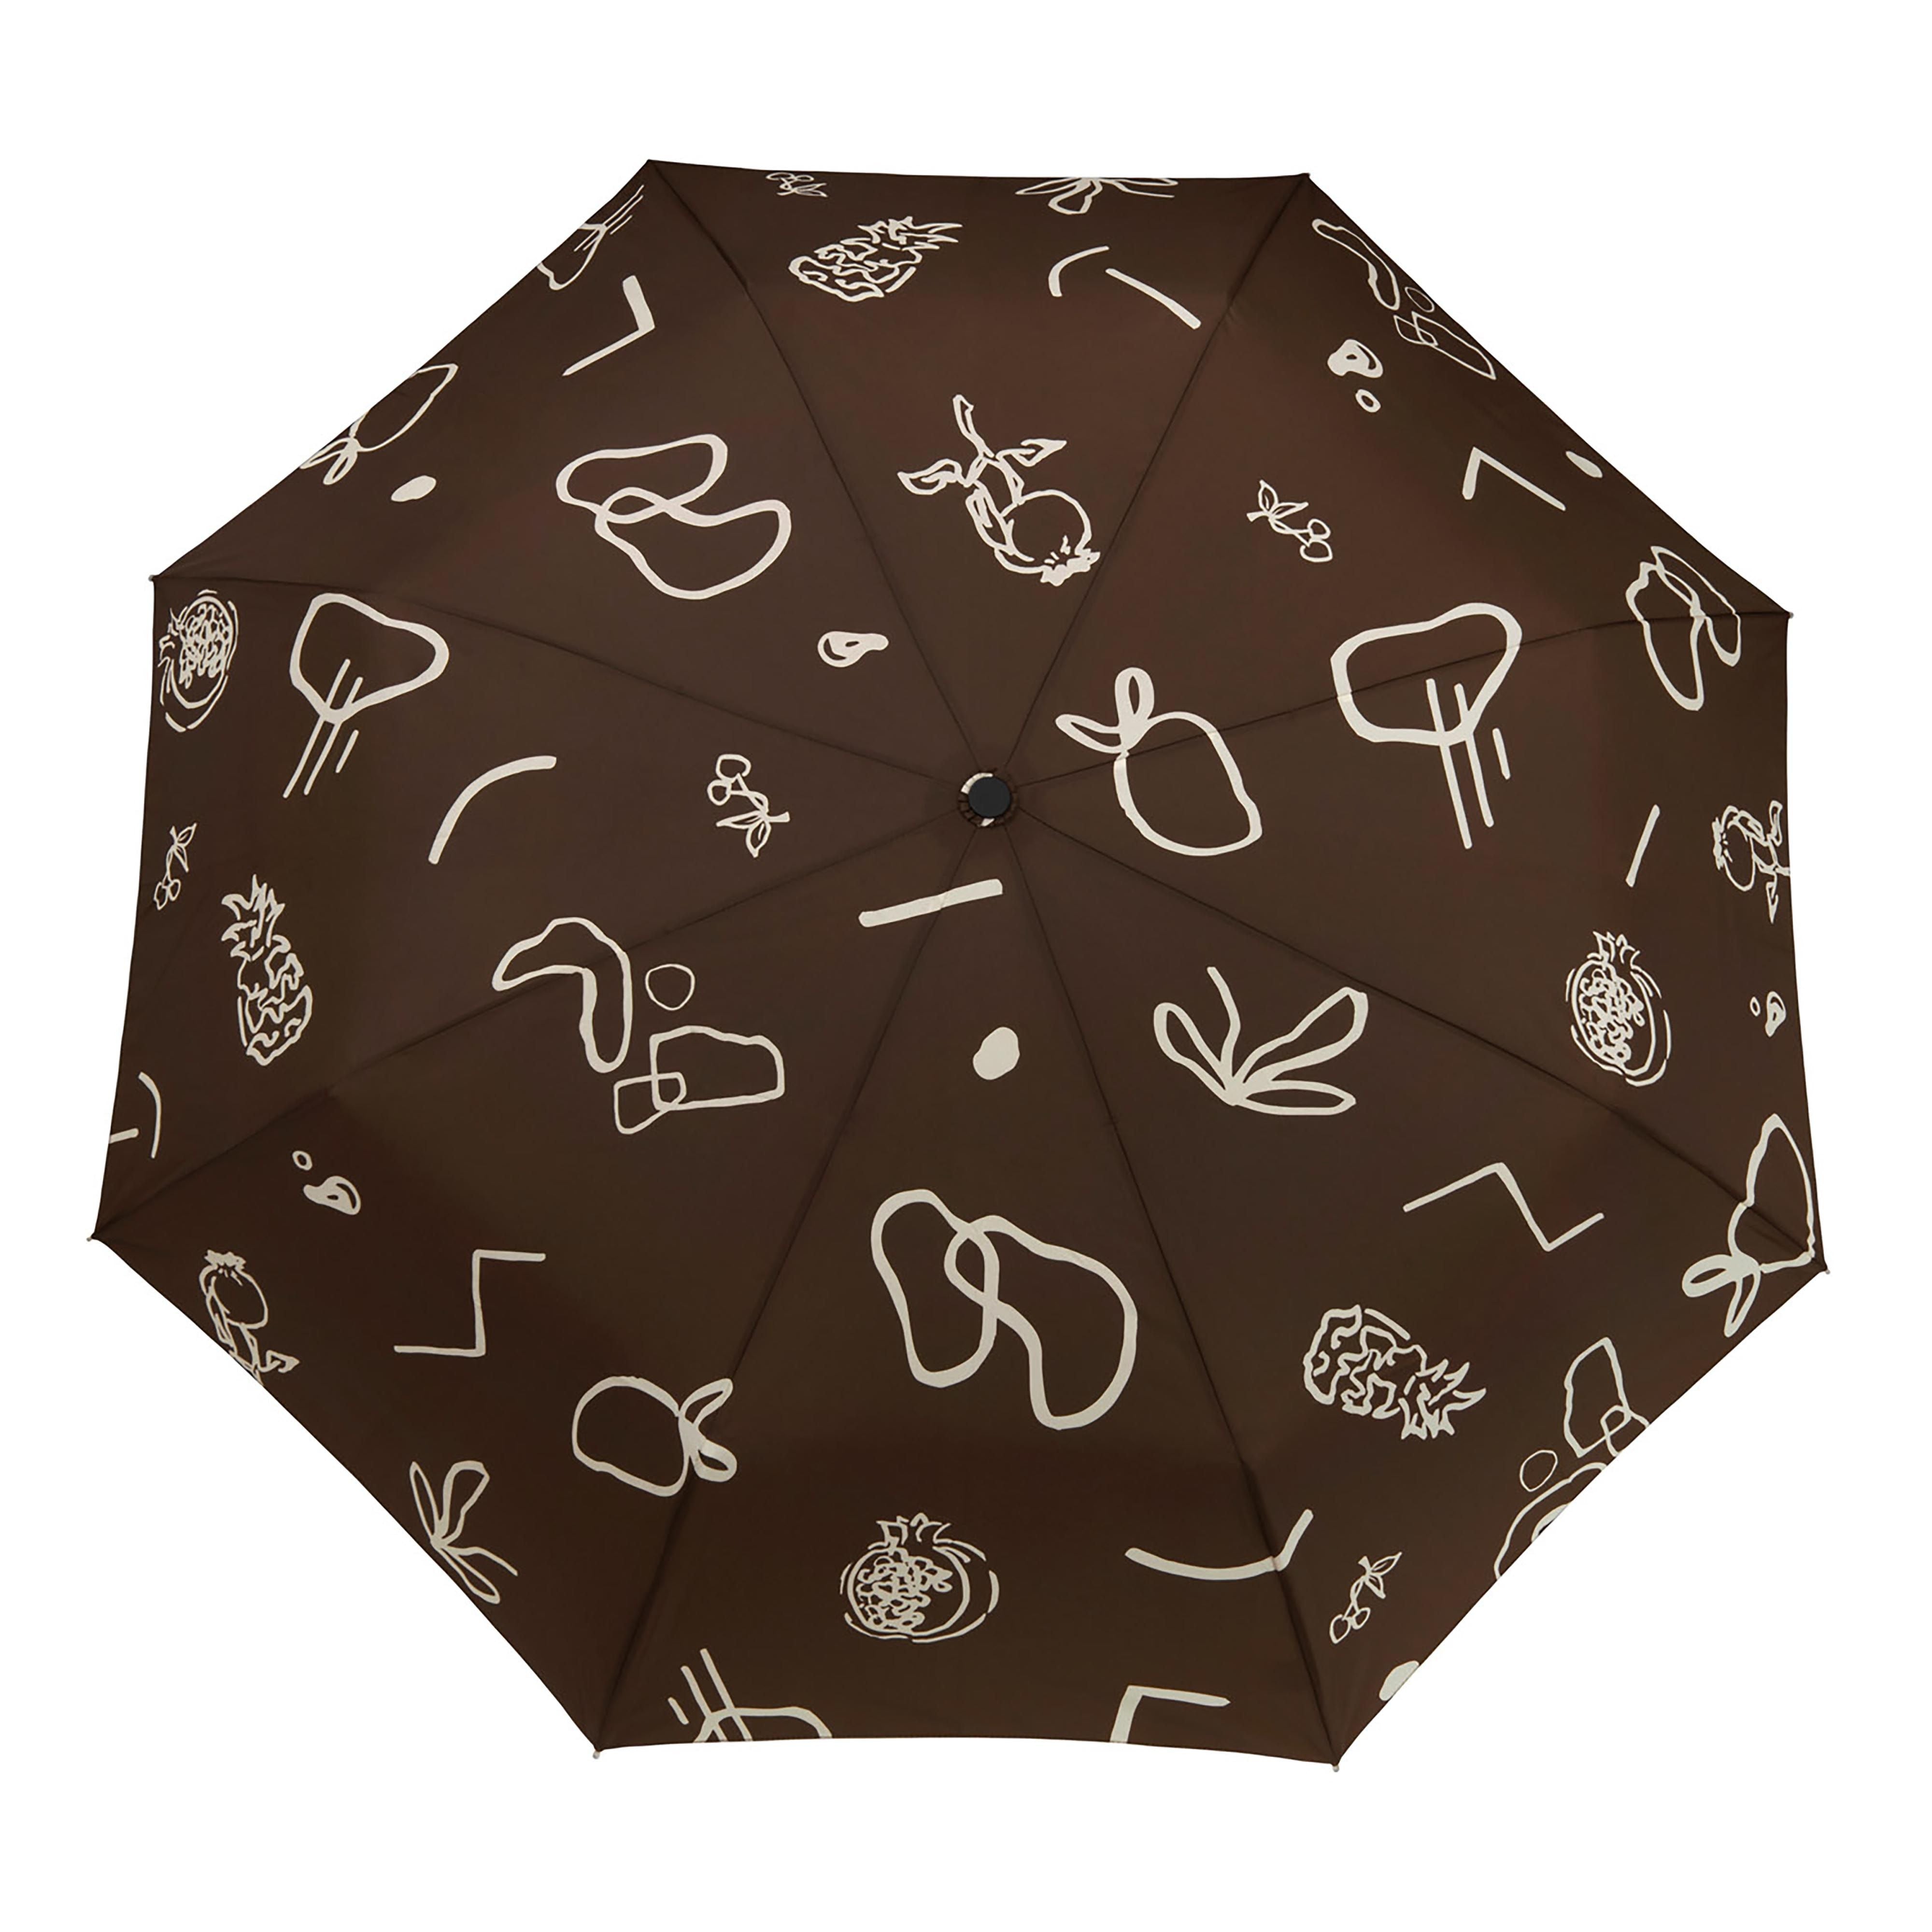 Duck Umbrella Compact - Fruits & Shapes In Chocolate-Travel & Outdoors-Original Duckhead-The Bay Room